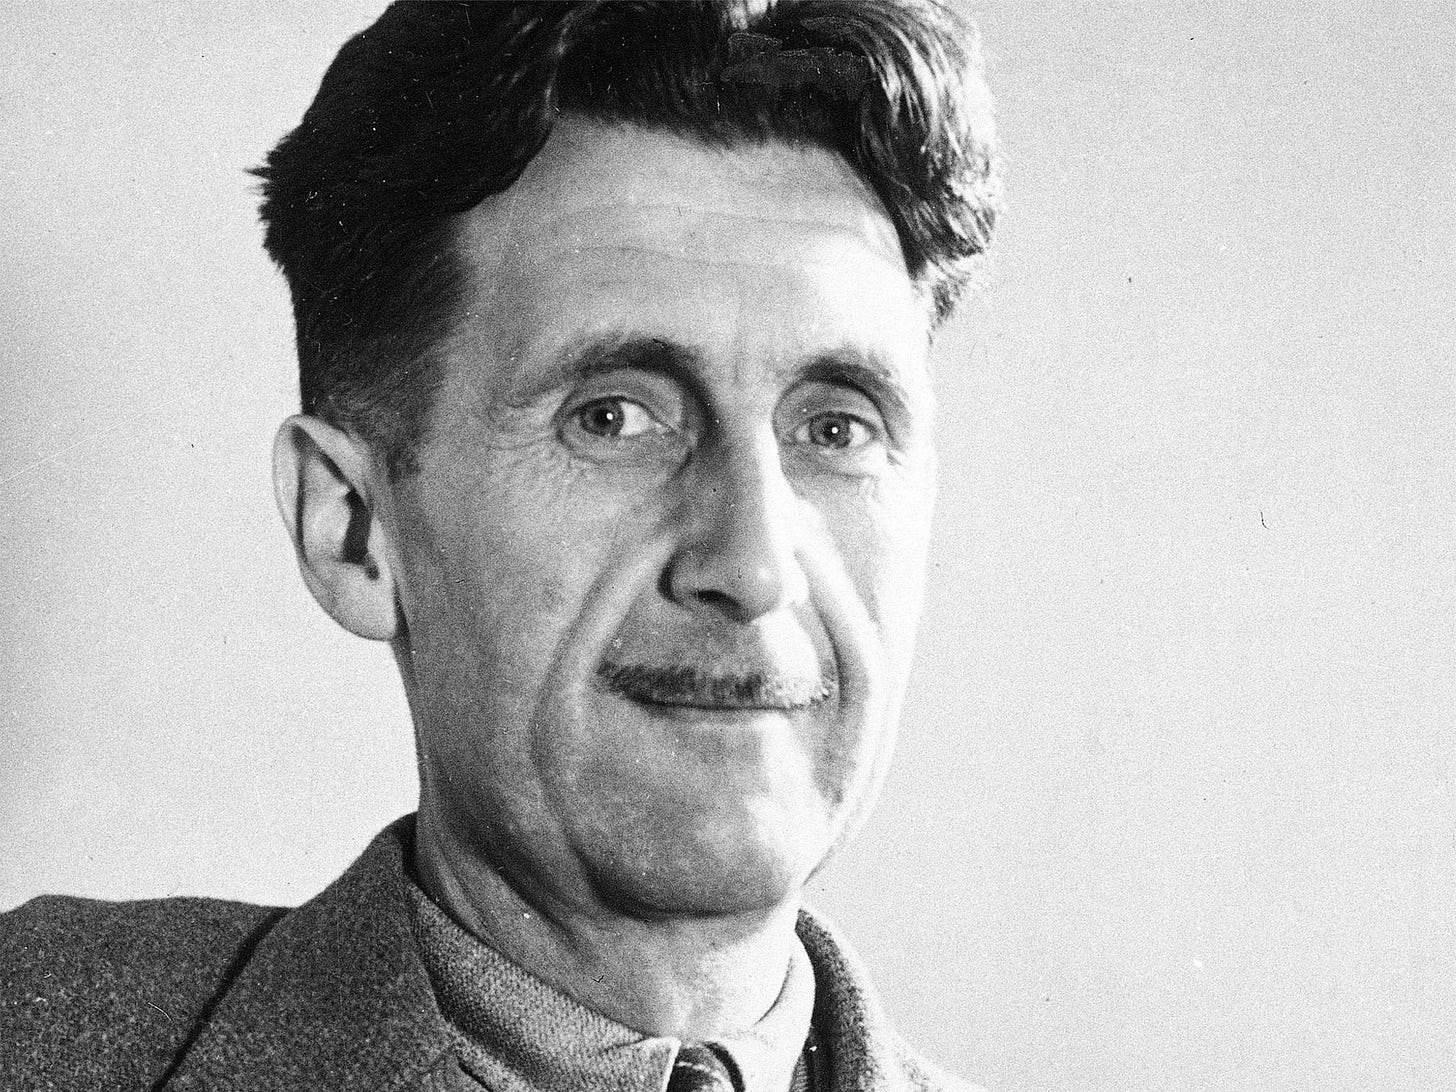 George Orwell poetry collection cleared for sale – despite fears ...